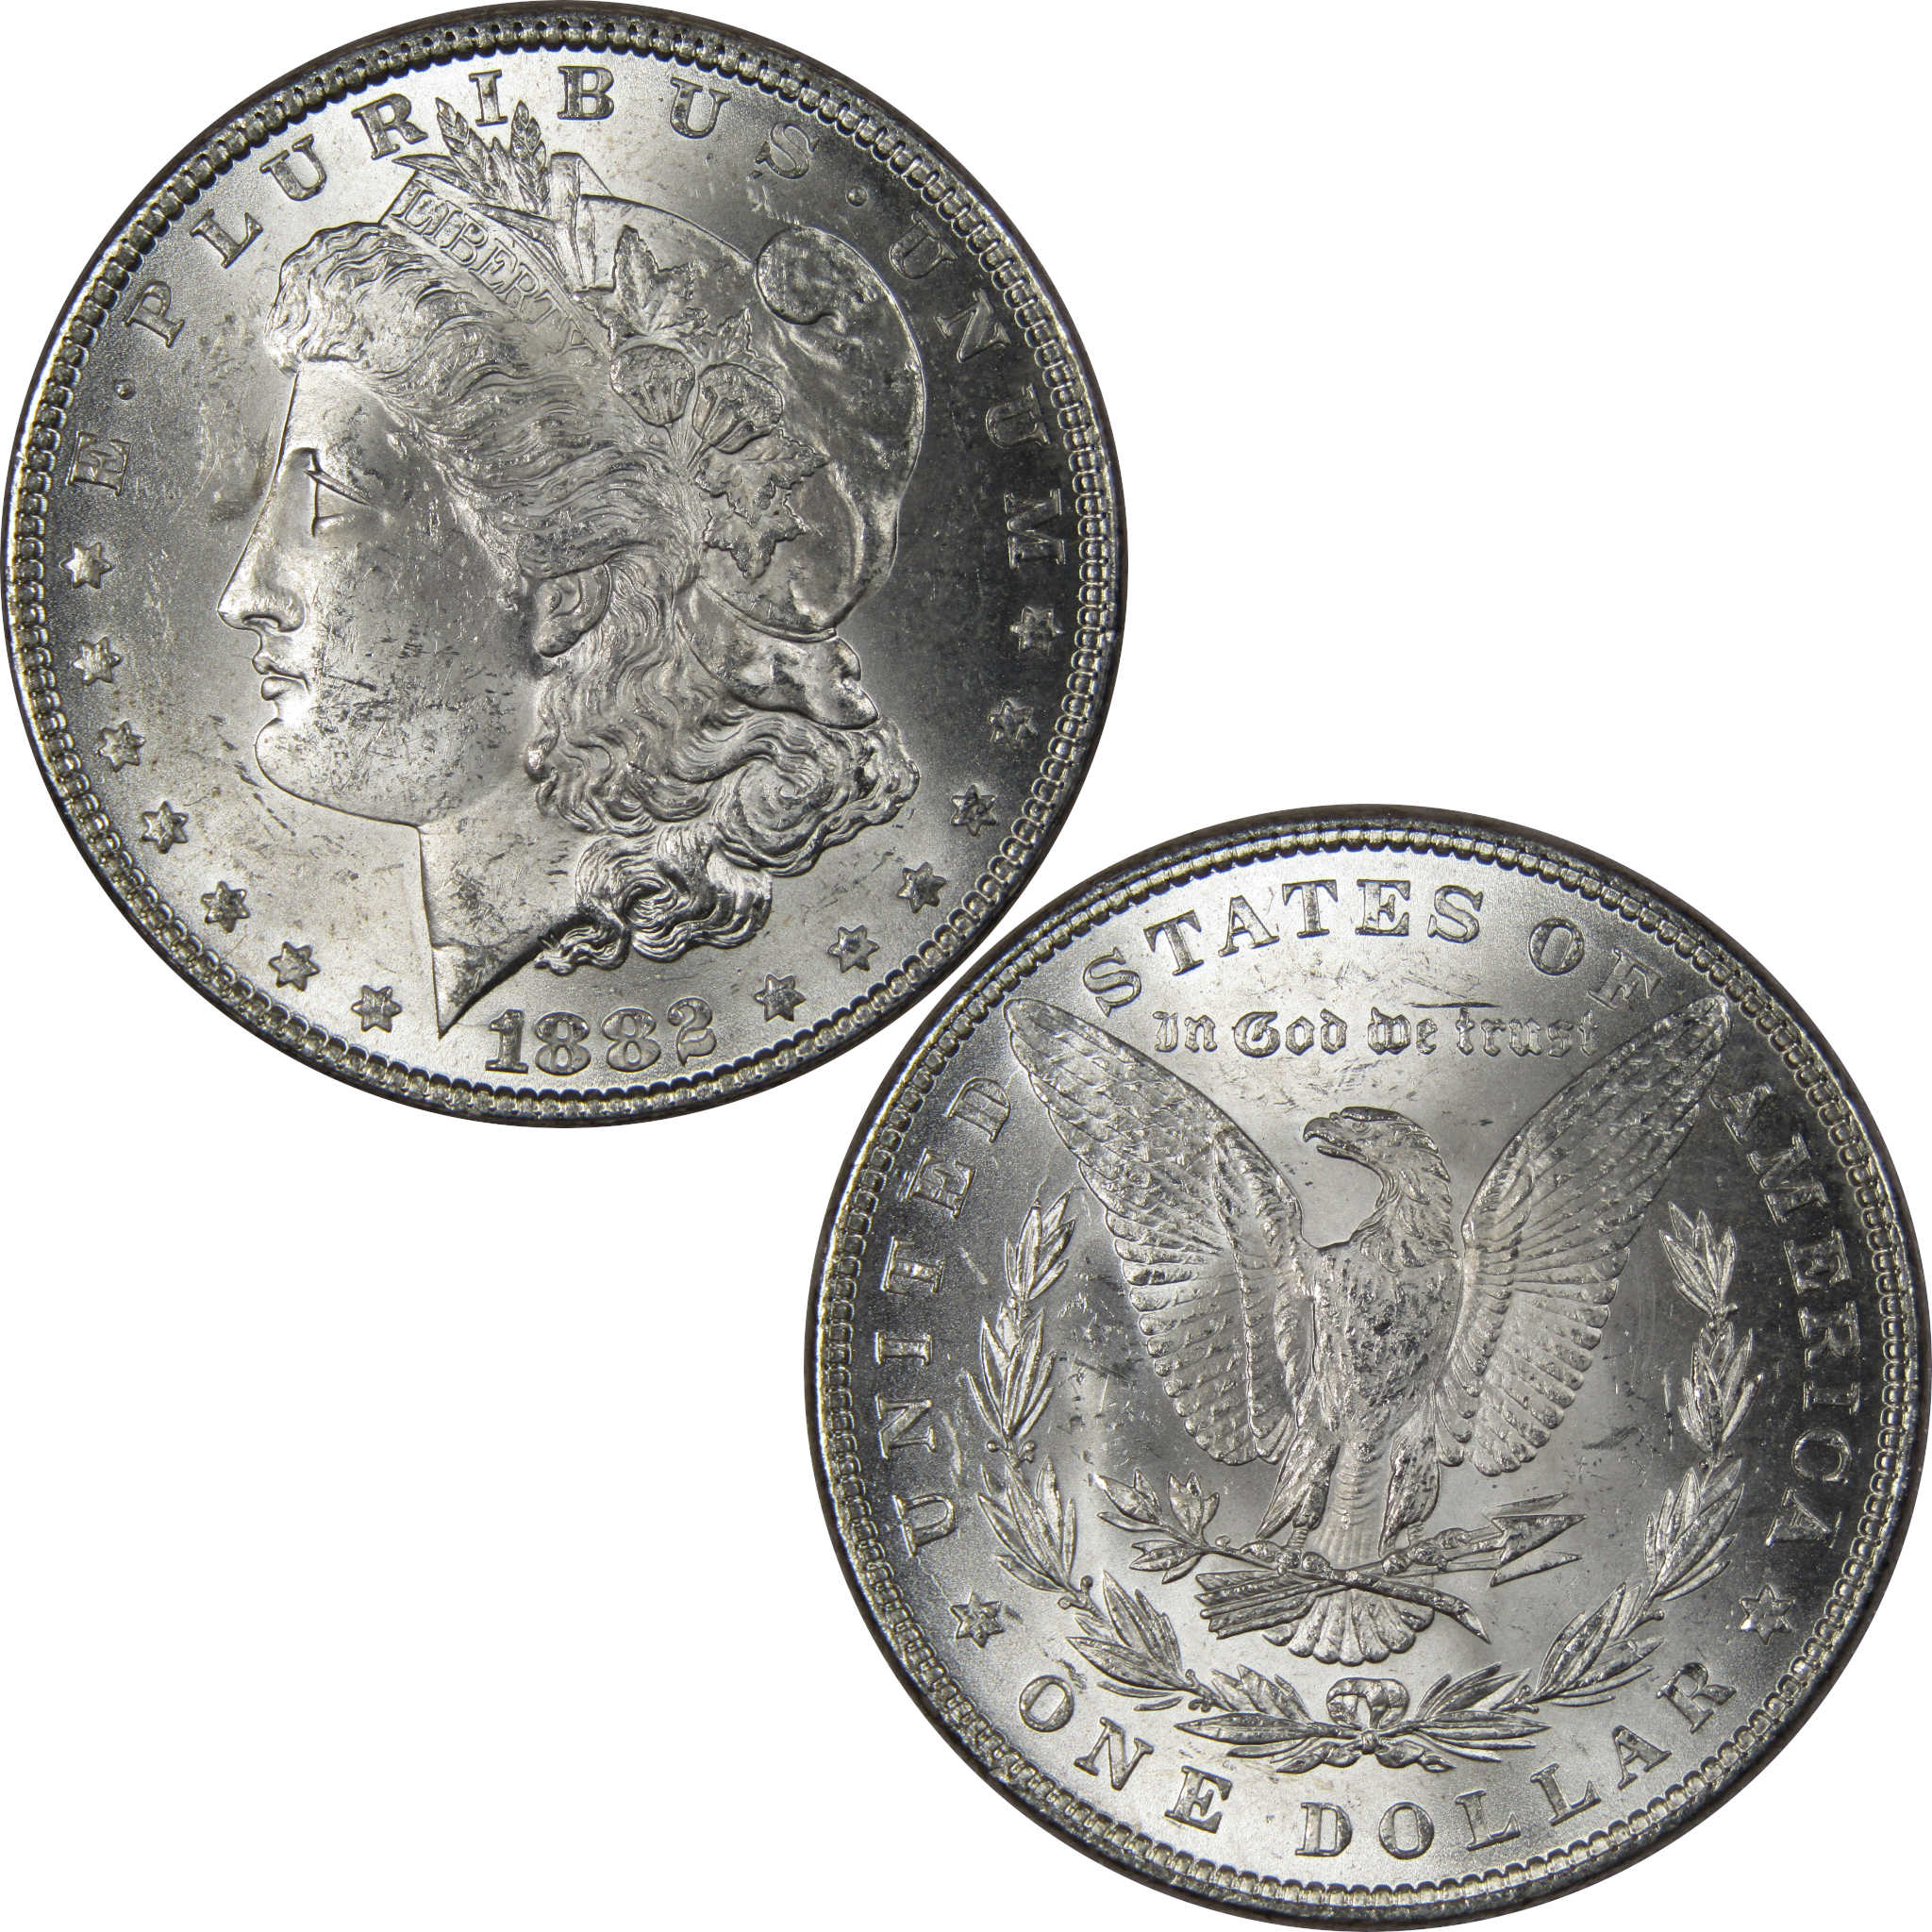 1882 Morgan Dollar BU Uncirculated Mint State 90% Silver SKU:IPC9693 - Morgan coin - Morgan silver dollar - Morgan silver dollar for sale - Profile Coins &amp; Collectibles